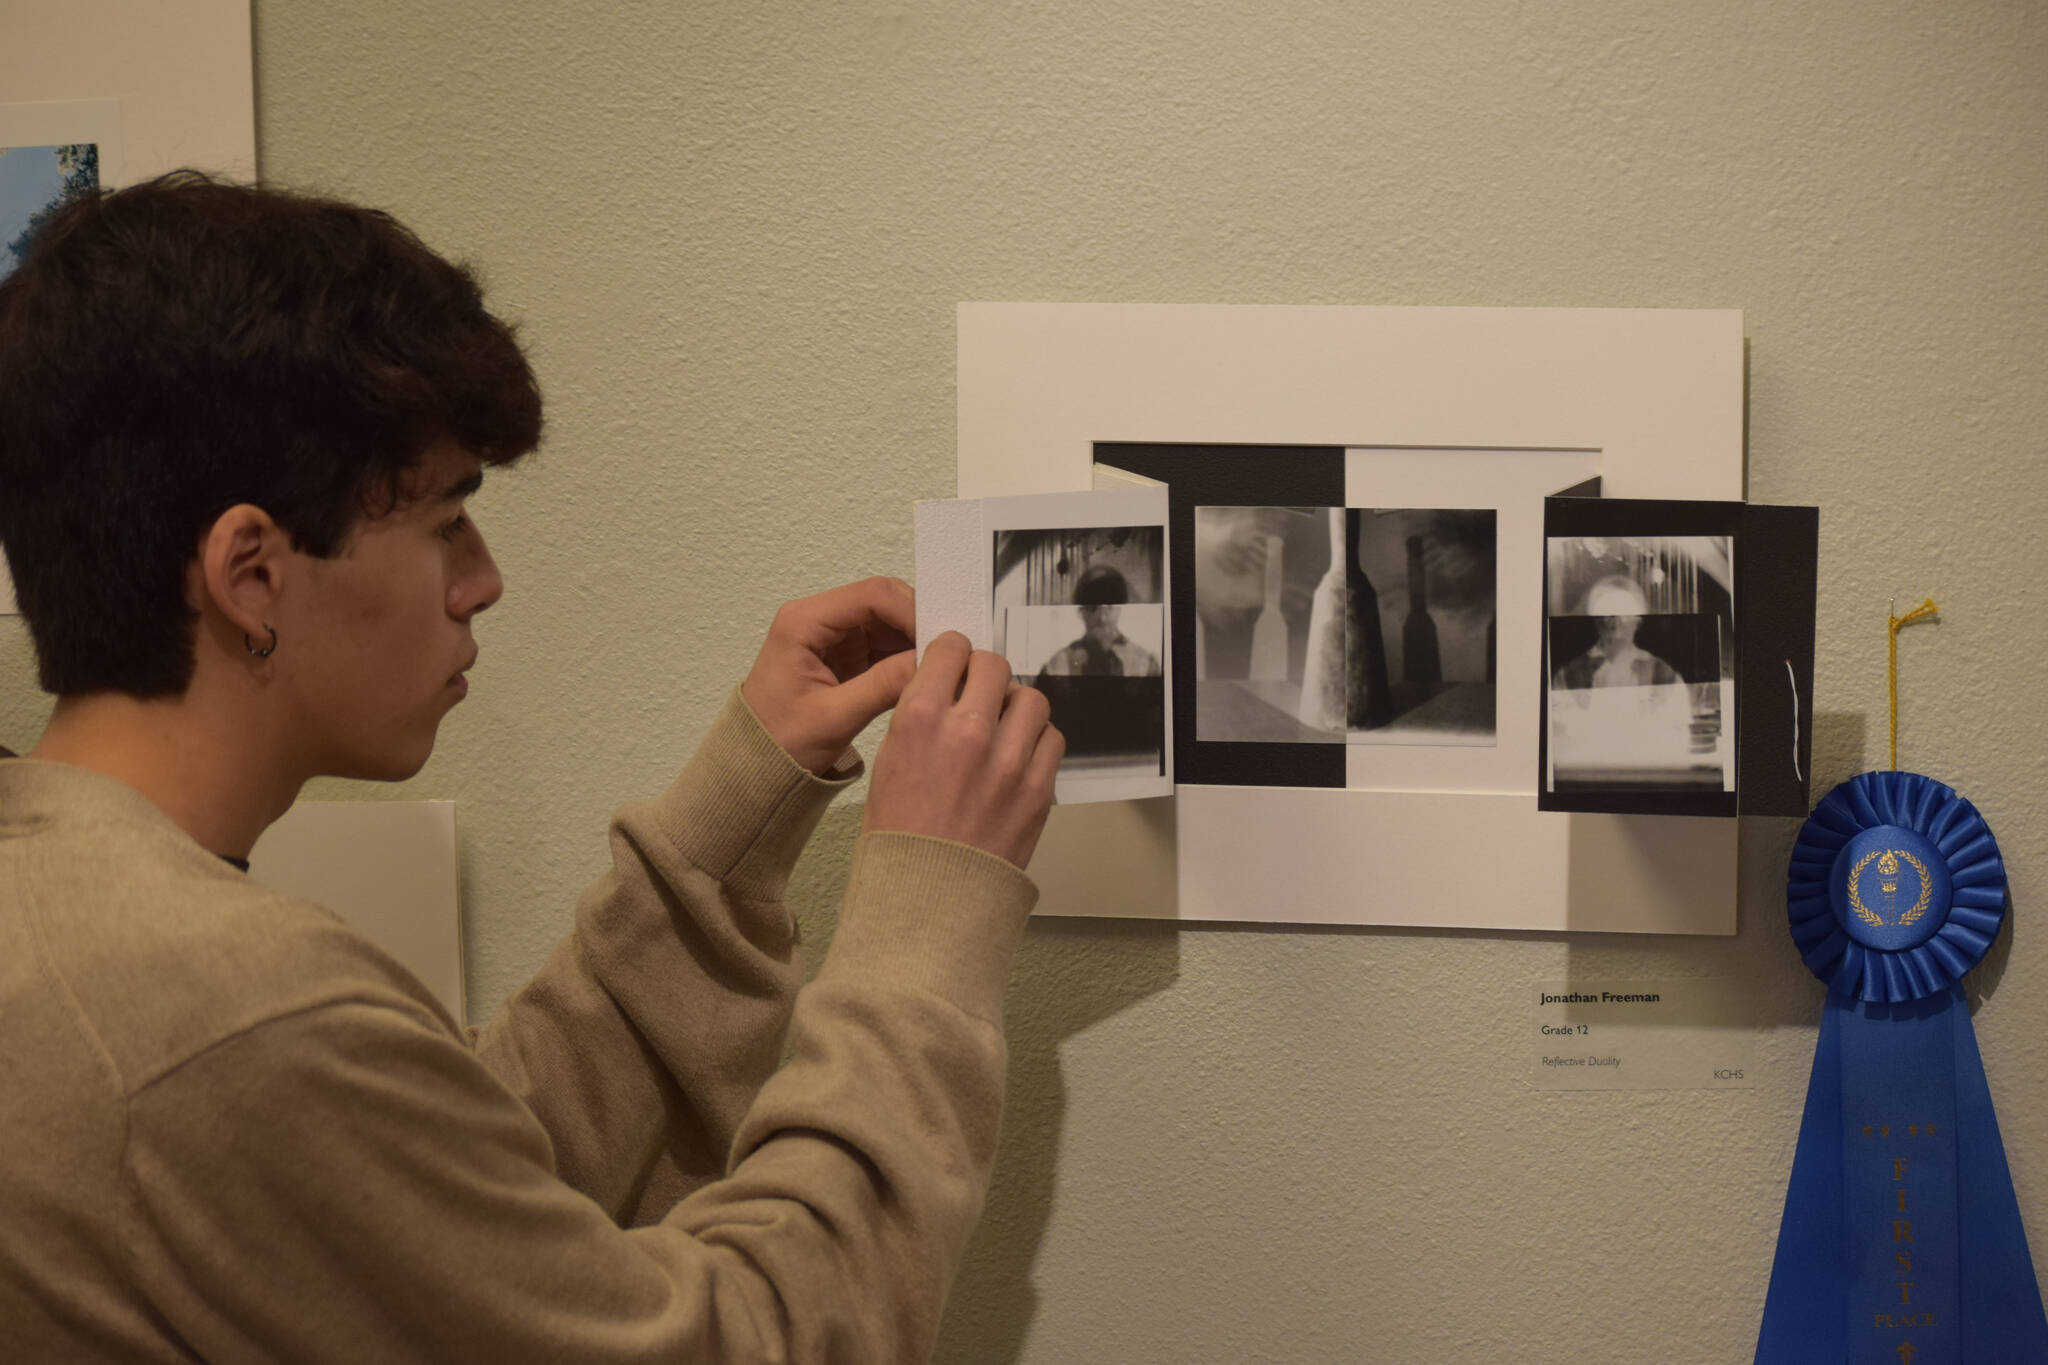 Jonathan Freeman displays his first place photography piece during the opening reception of the Kenai Art Center’s annual student show on Thursday, April 7, 2022. (Camille Botello/Peninsula Clarion)